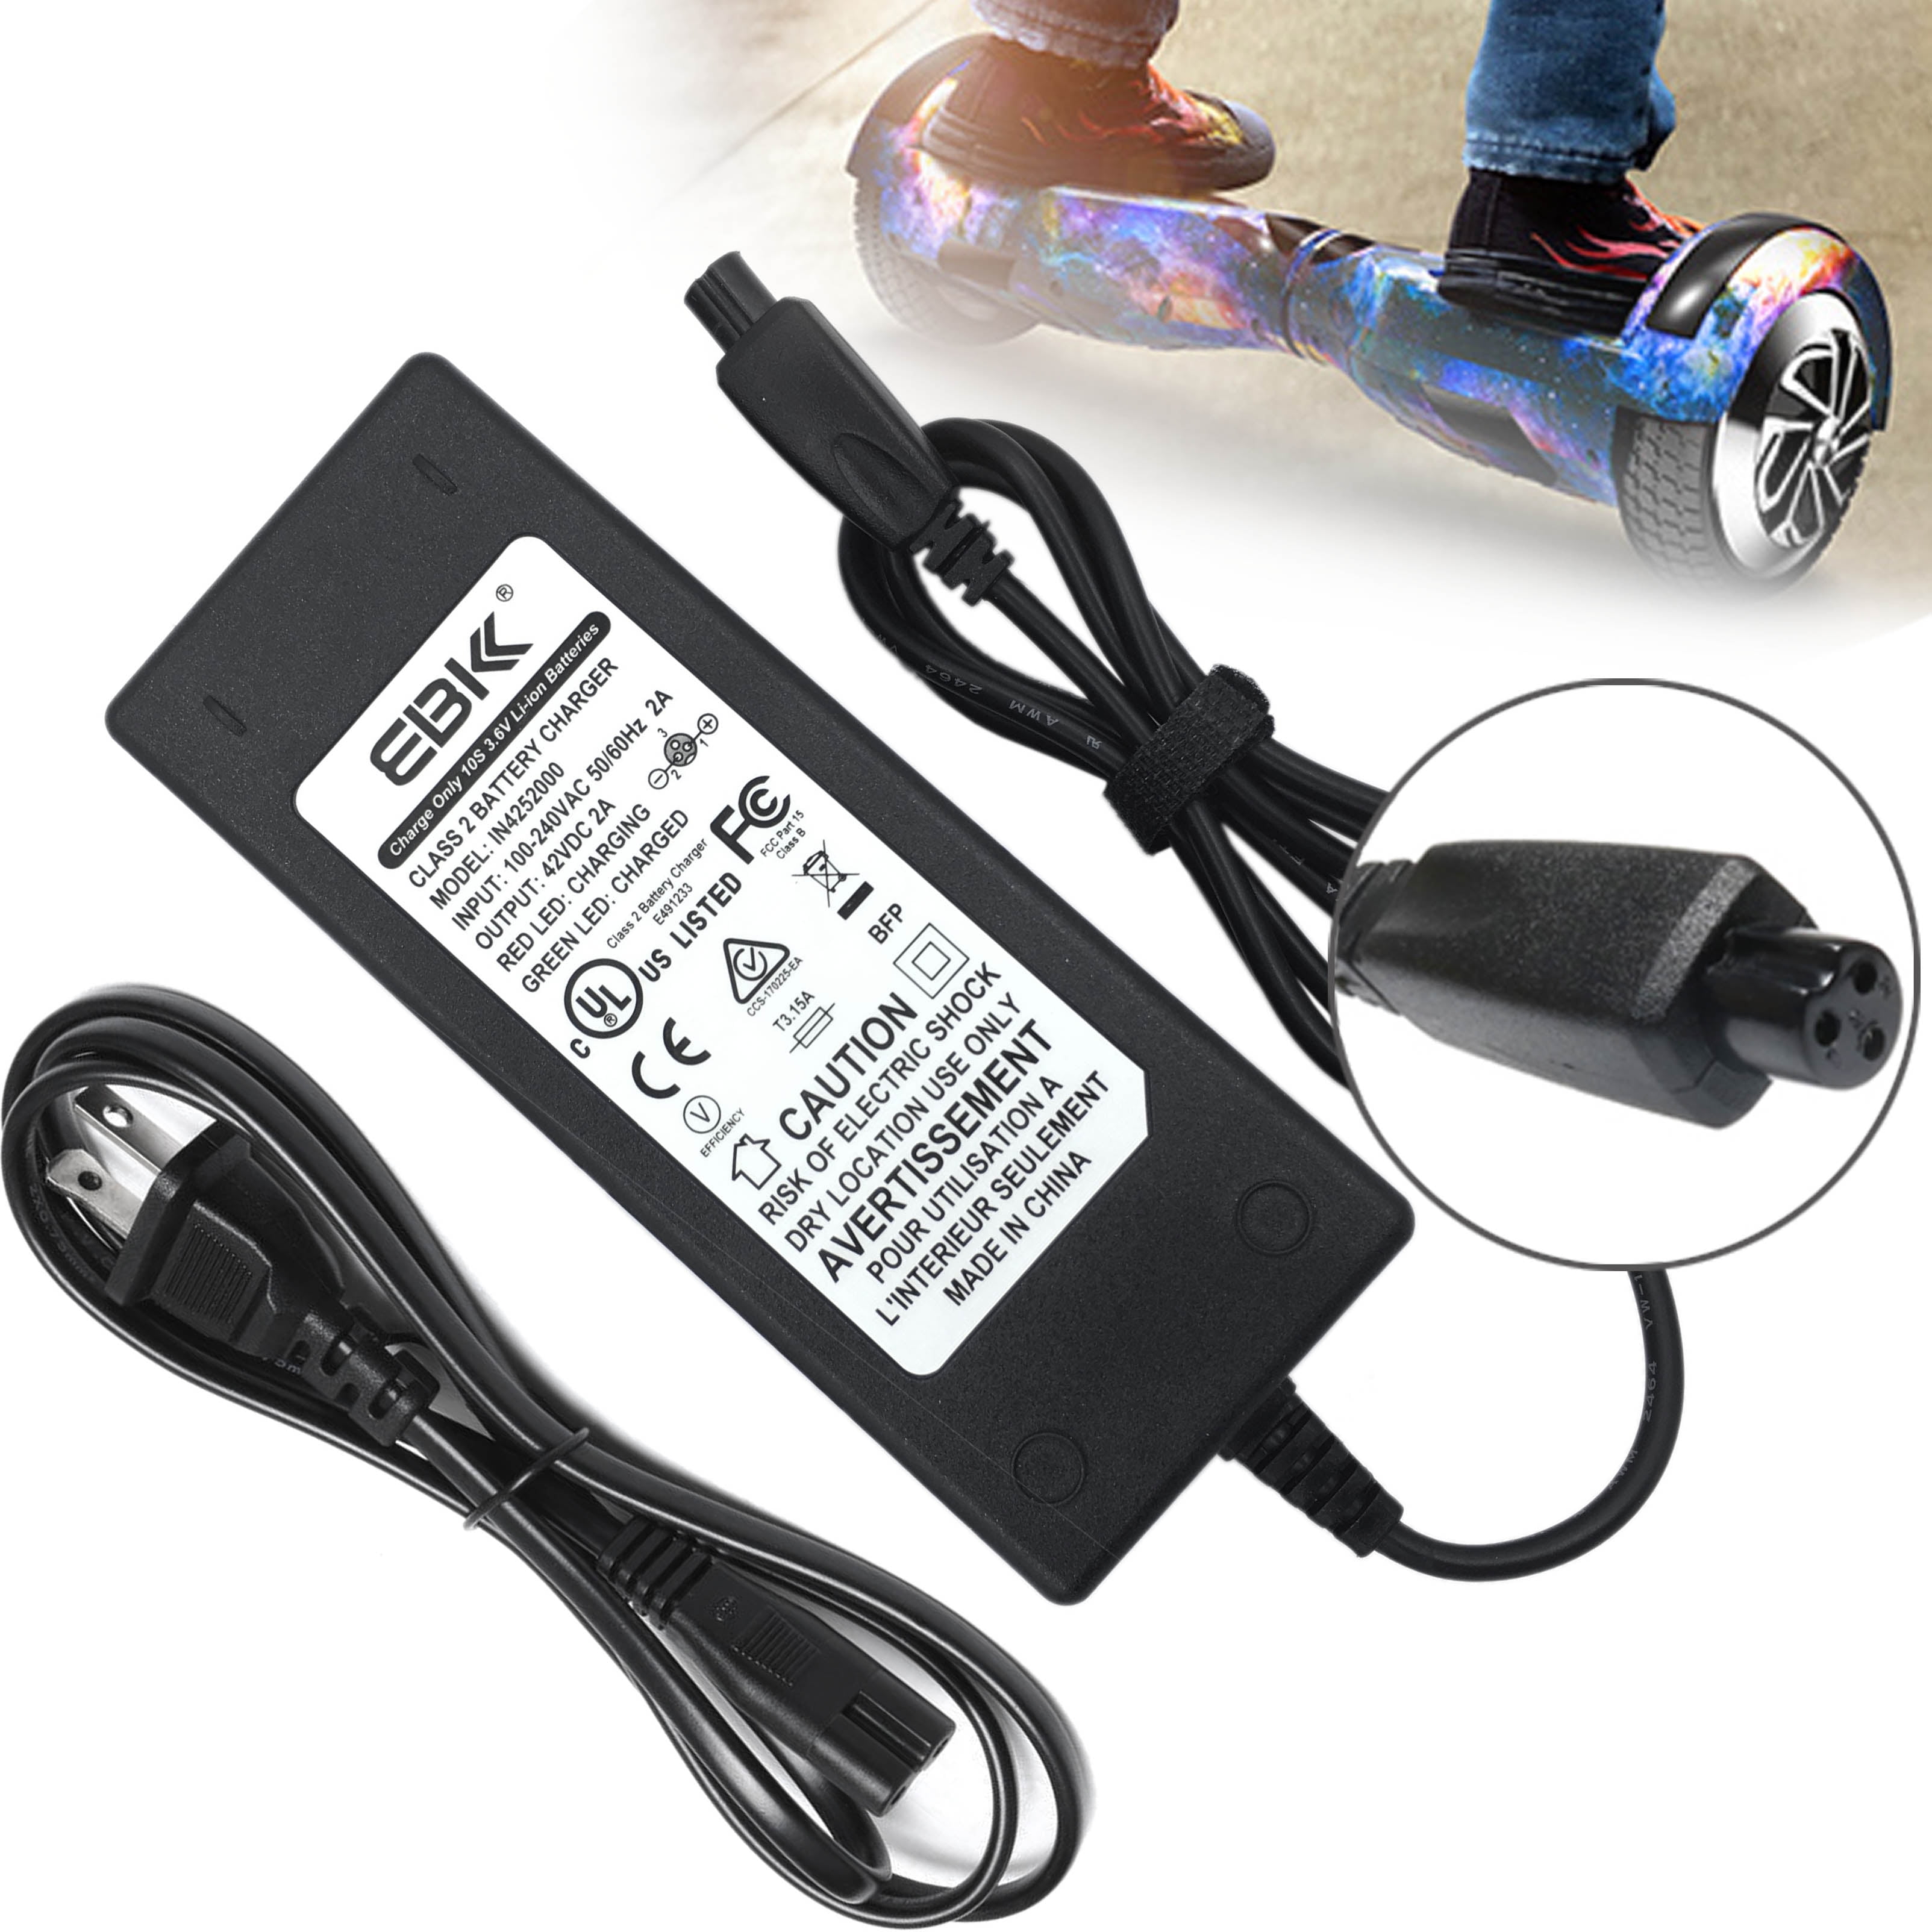 Battery Charger For Electric Scooter Balance Hoverboard 42V2A US EU UK Plug 